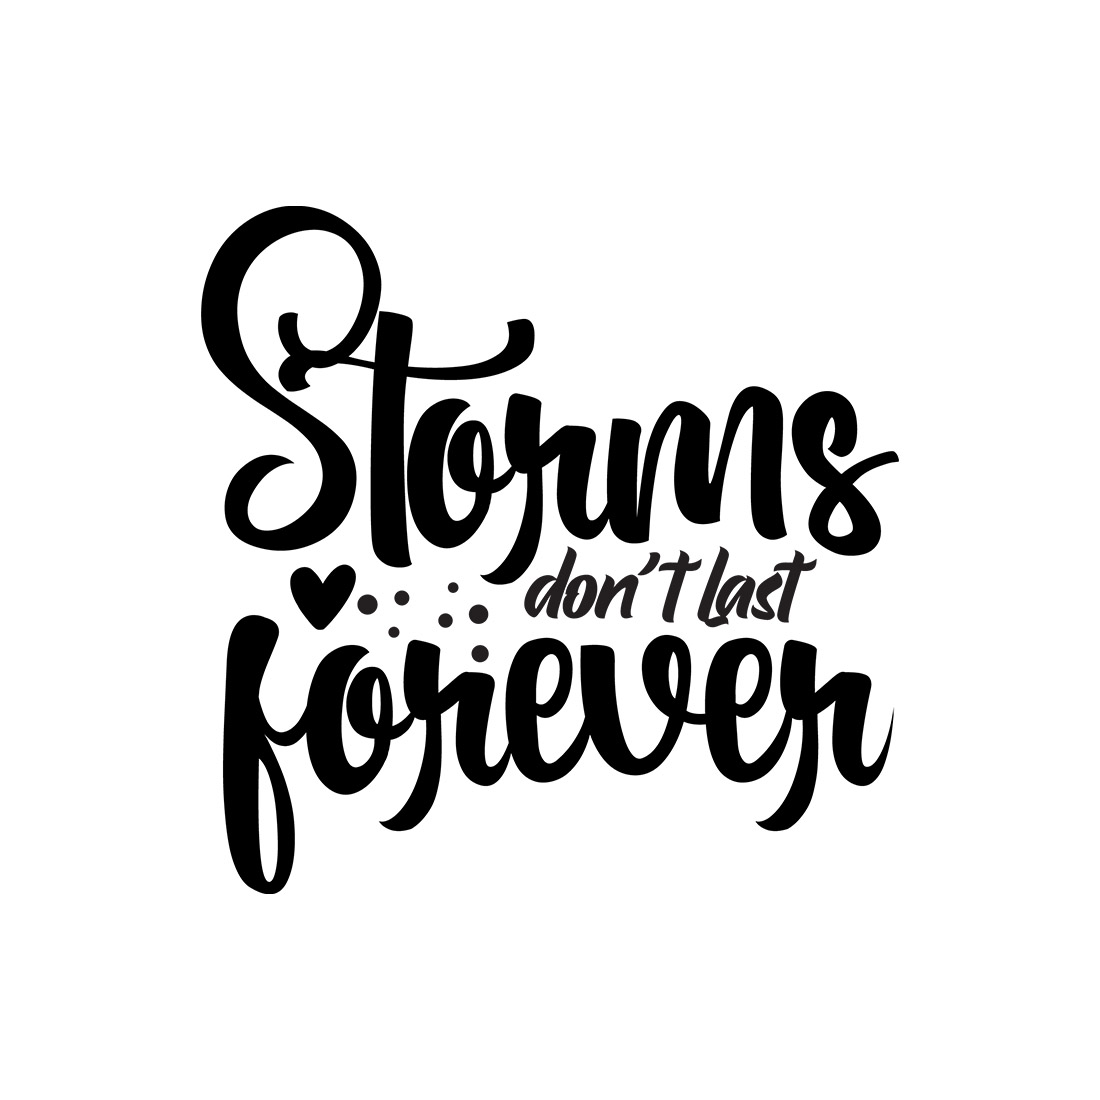 Image with amazing black lettering for prints Sometimes Storms Do Not Last Forever.